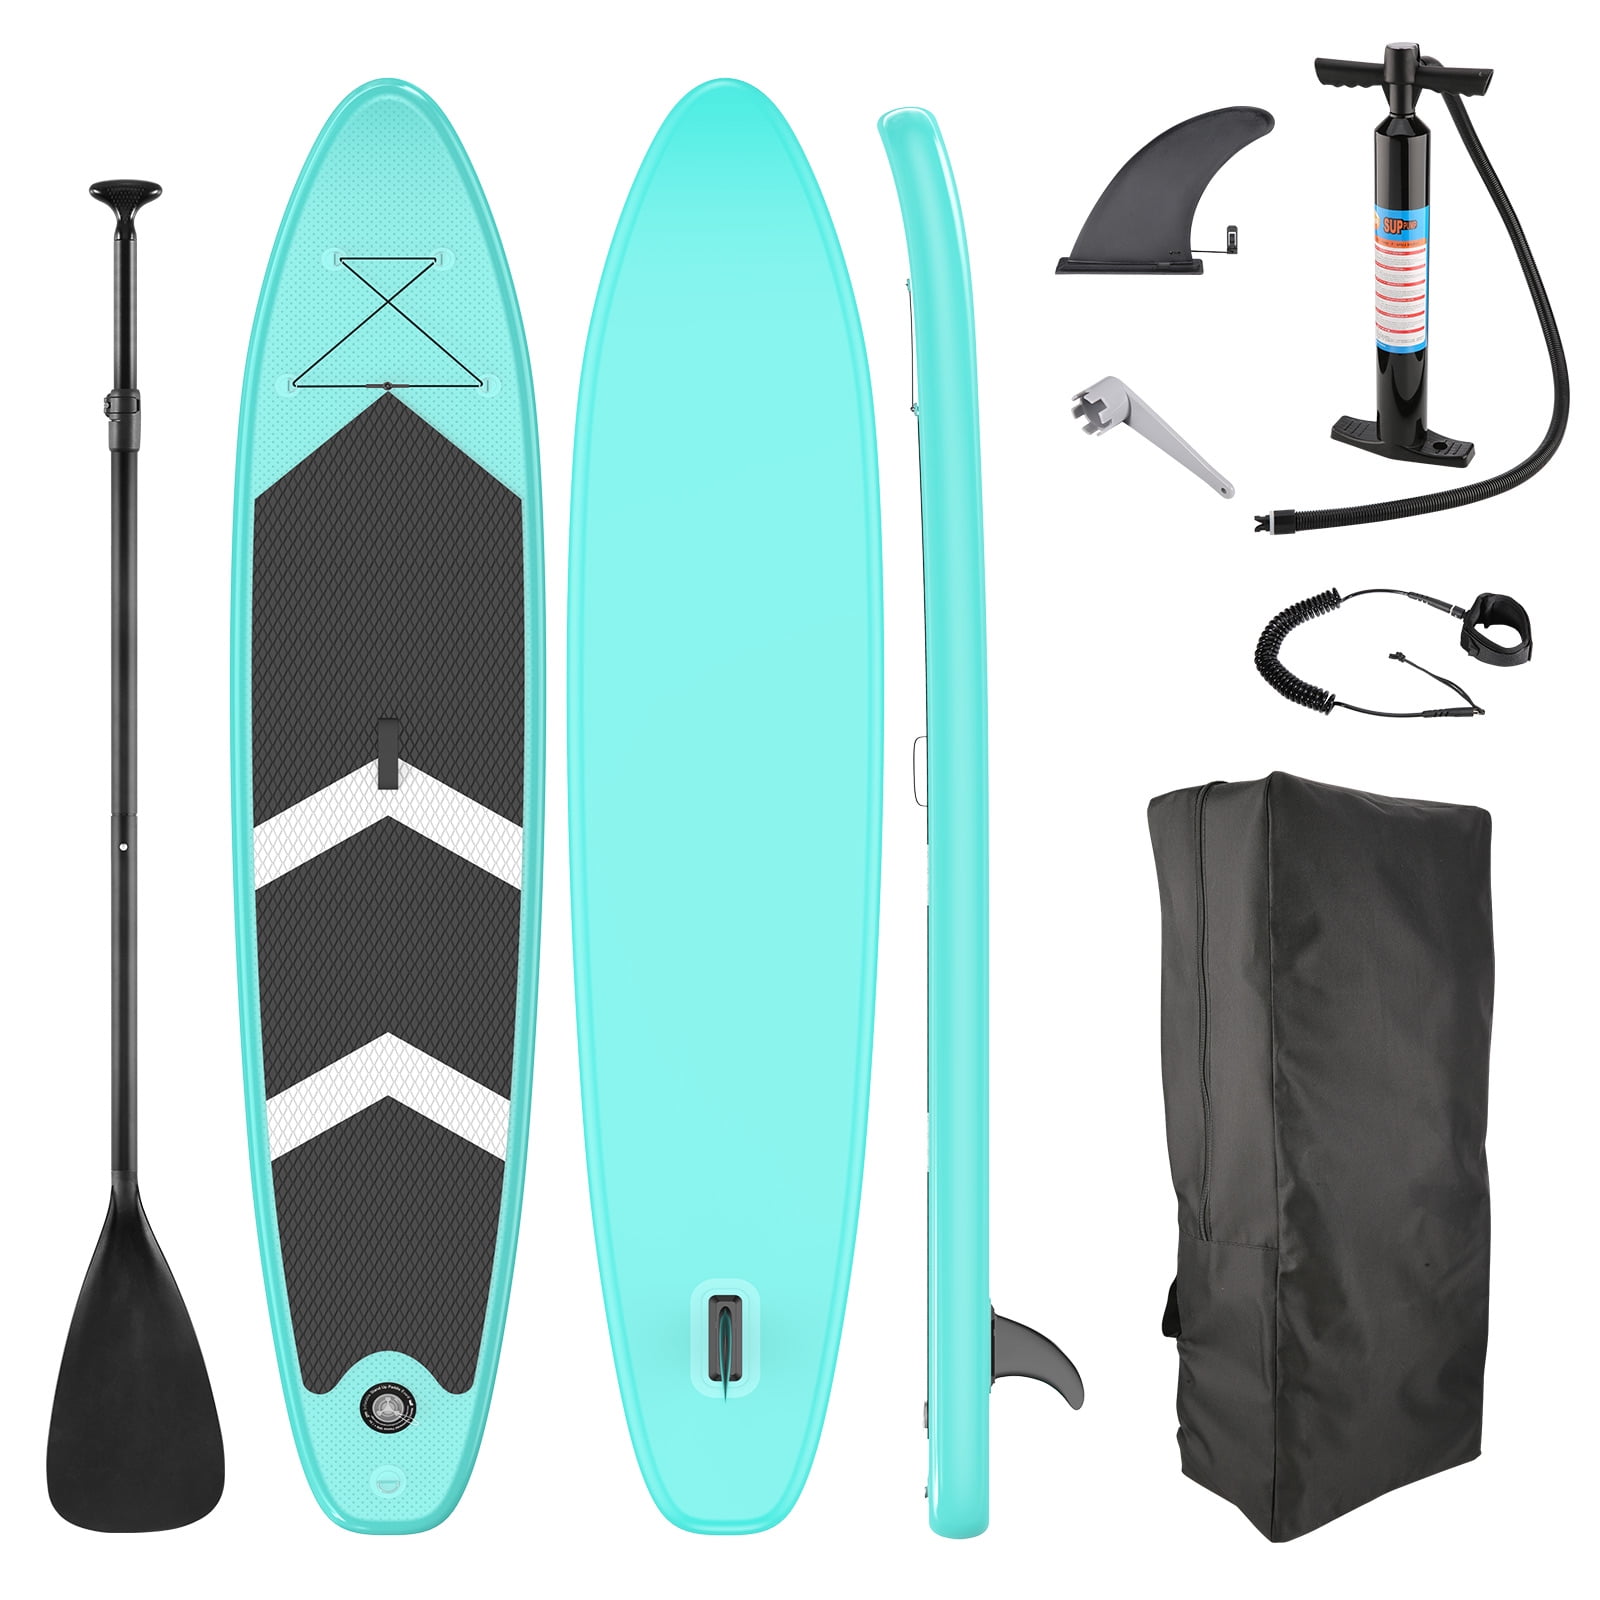 All-Round SUP Board with SUP Accessories Including Backpack Inflatable Stand Up Paddle Board Leash Bottom Fin for Paddling Waterproof Bag Adjustable Paddle and Hand Pump 